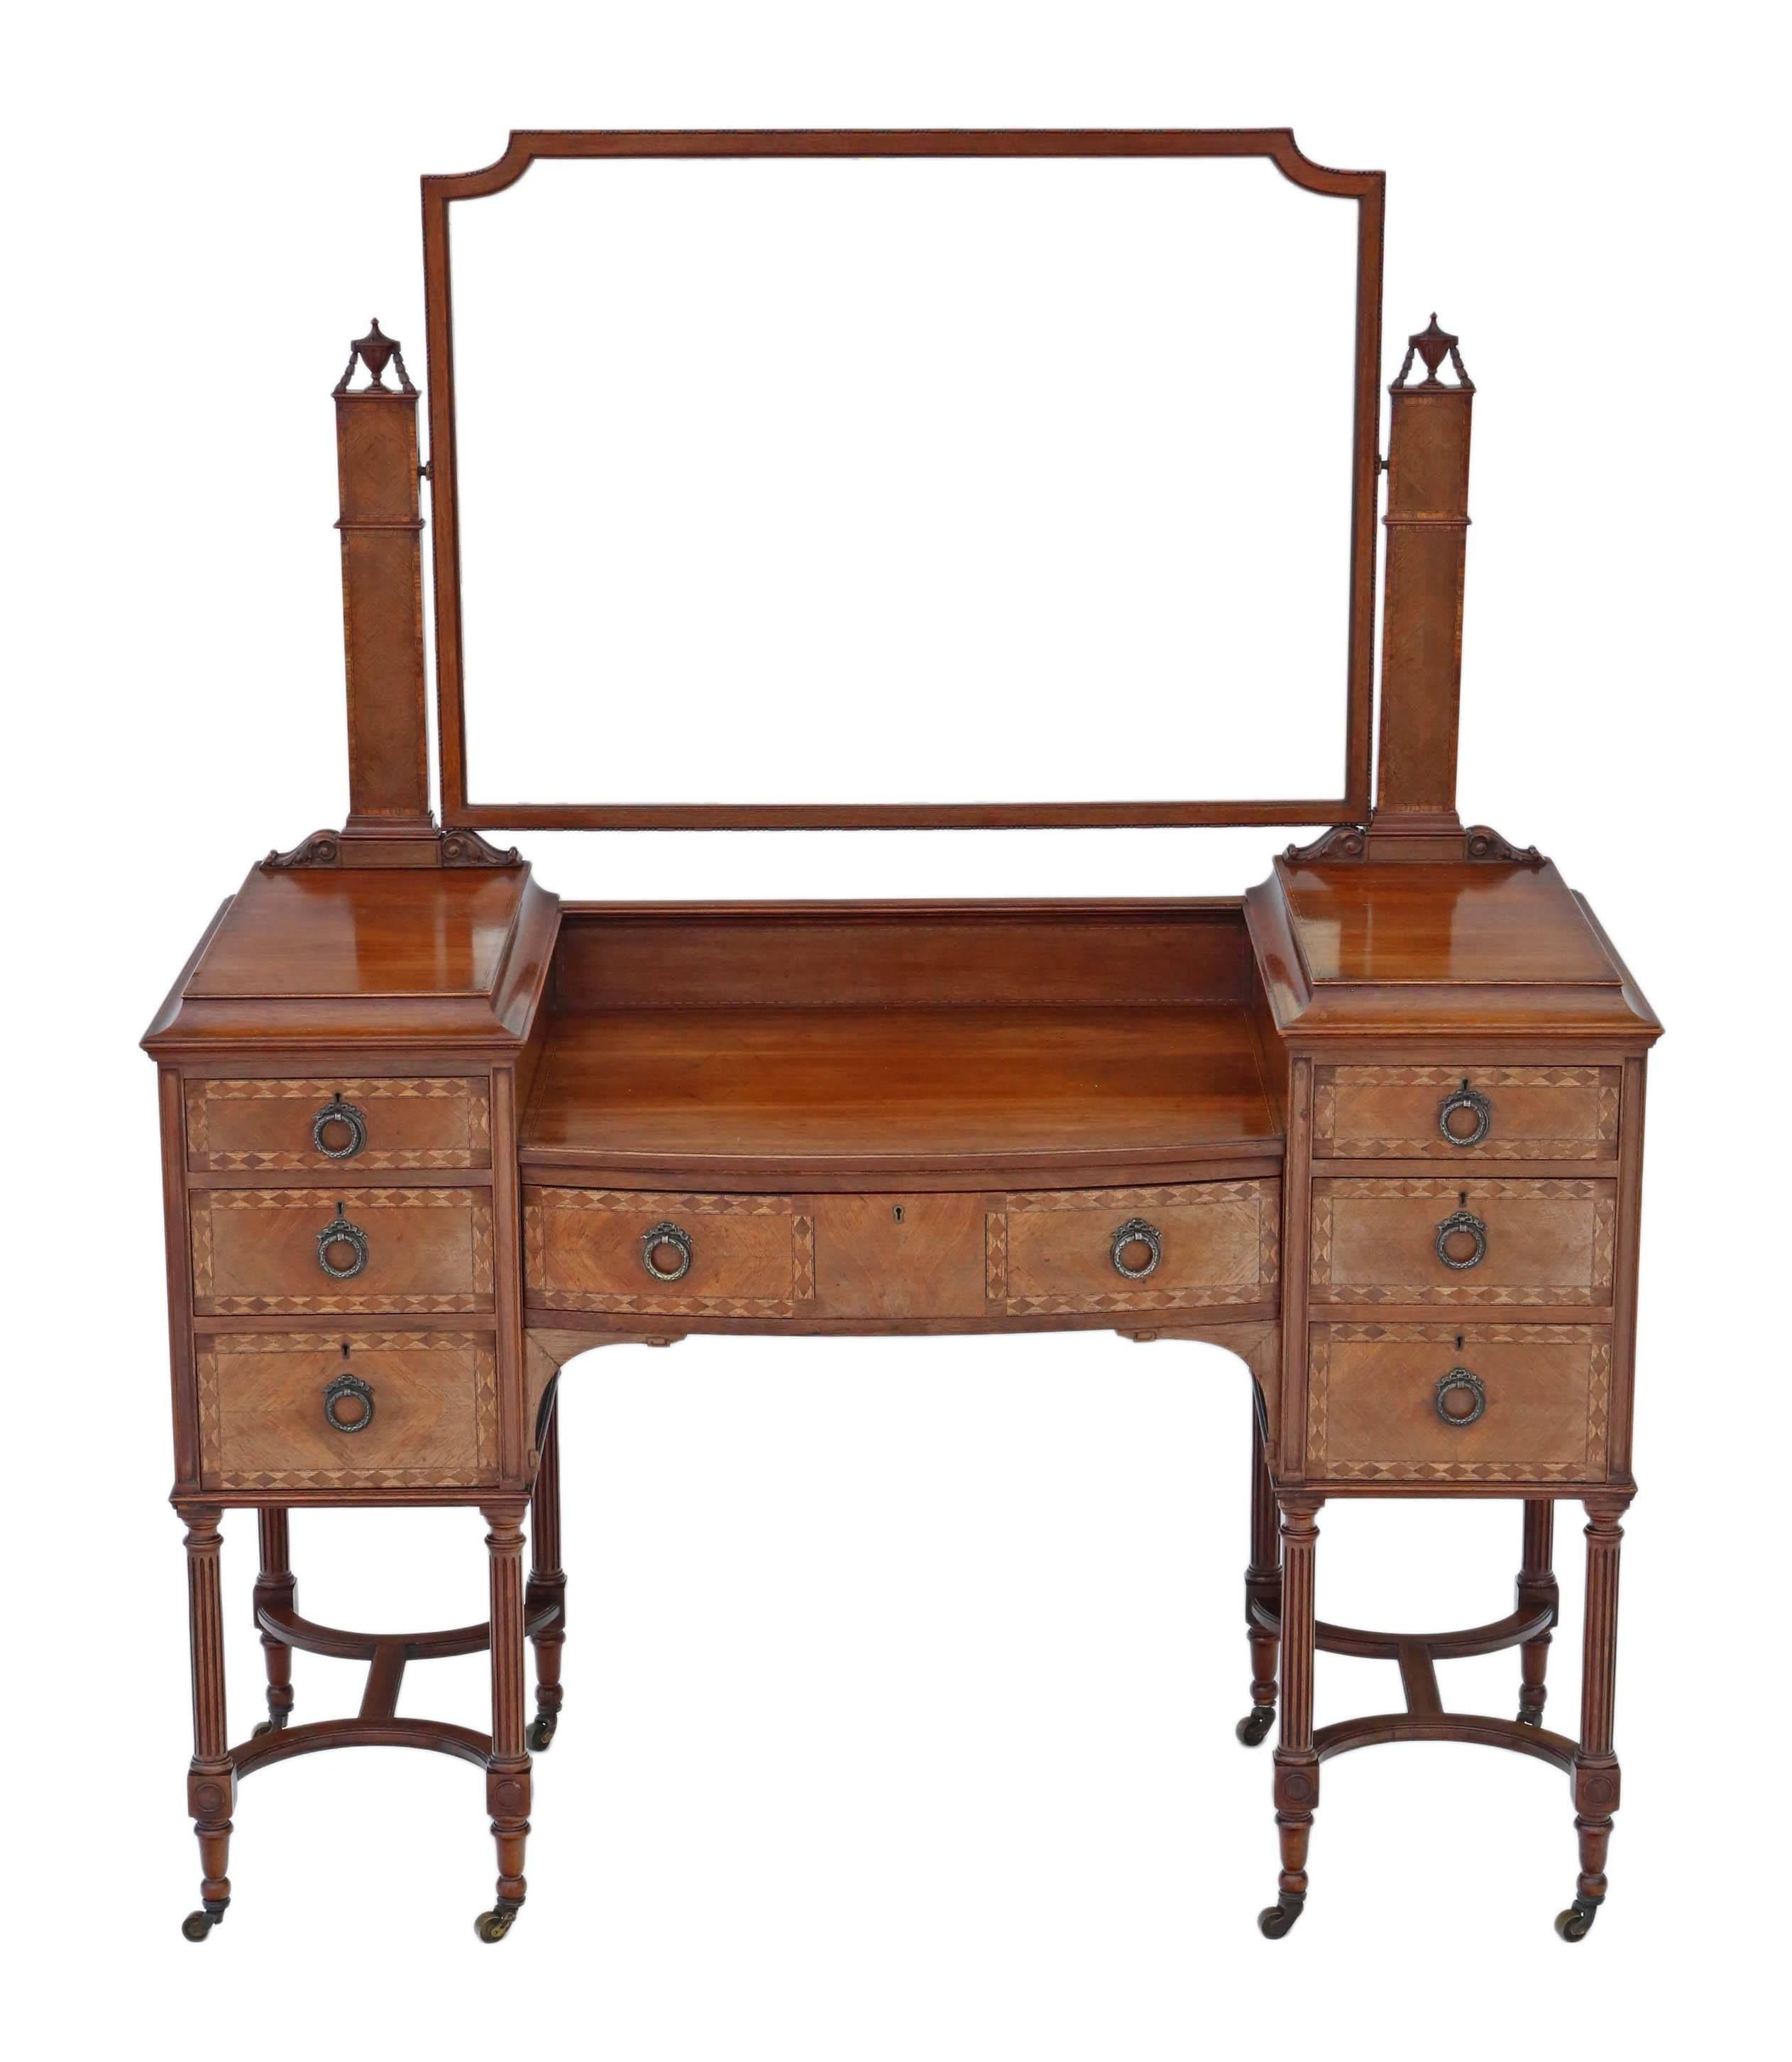 Antique quality Edwardian circa 1900-1910 inlaid rosewood dressing table. 

Solid and strong, with no loose joints and no woodworm. Full of age, character and charm. The mahogany lined drawers slide freely. The mirror holds position well. The